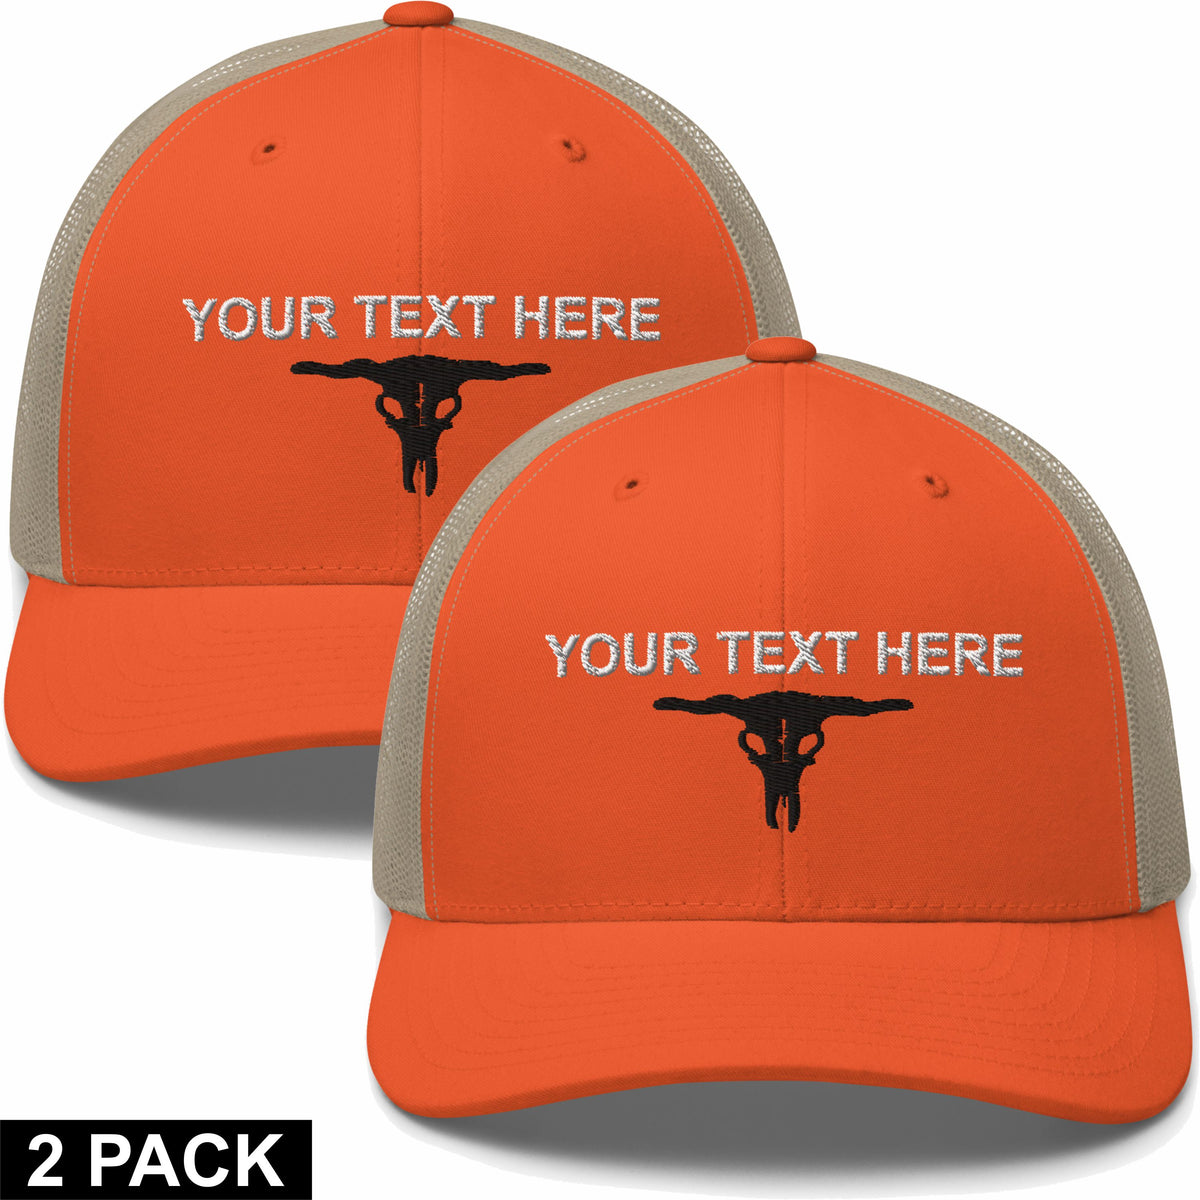 2 Embroidered Hats - Bull Skull - Your Text Here - Free Shipping